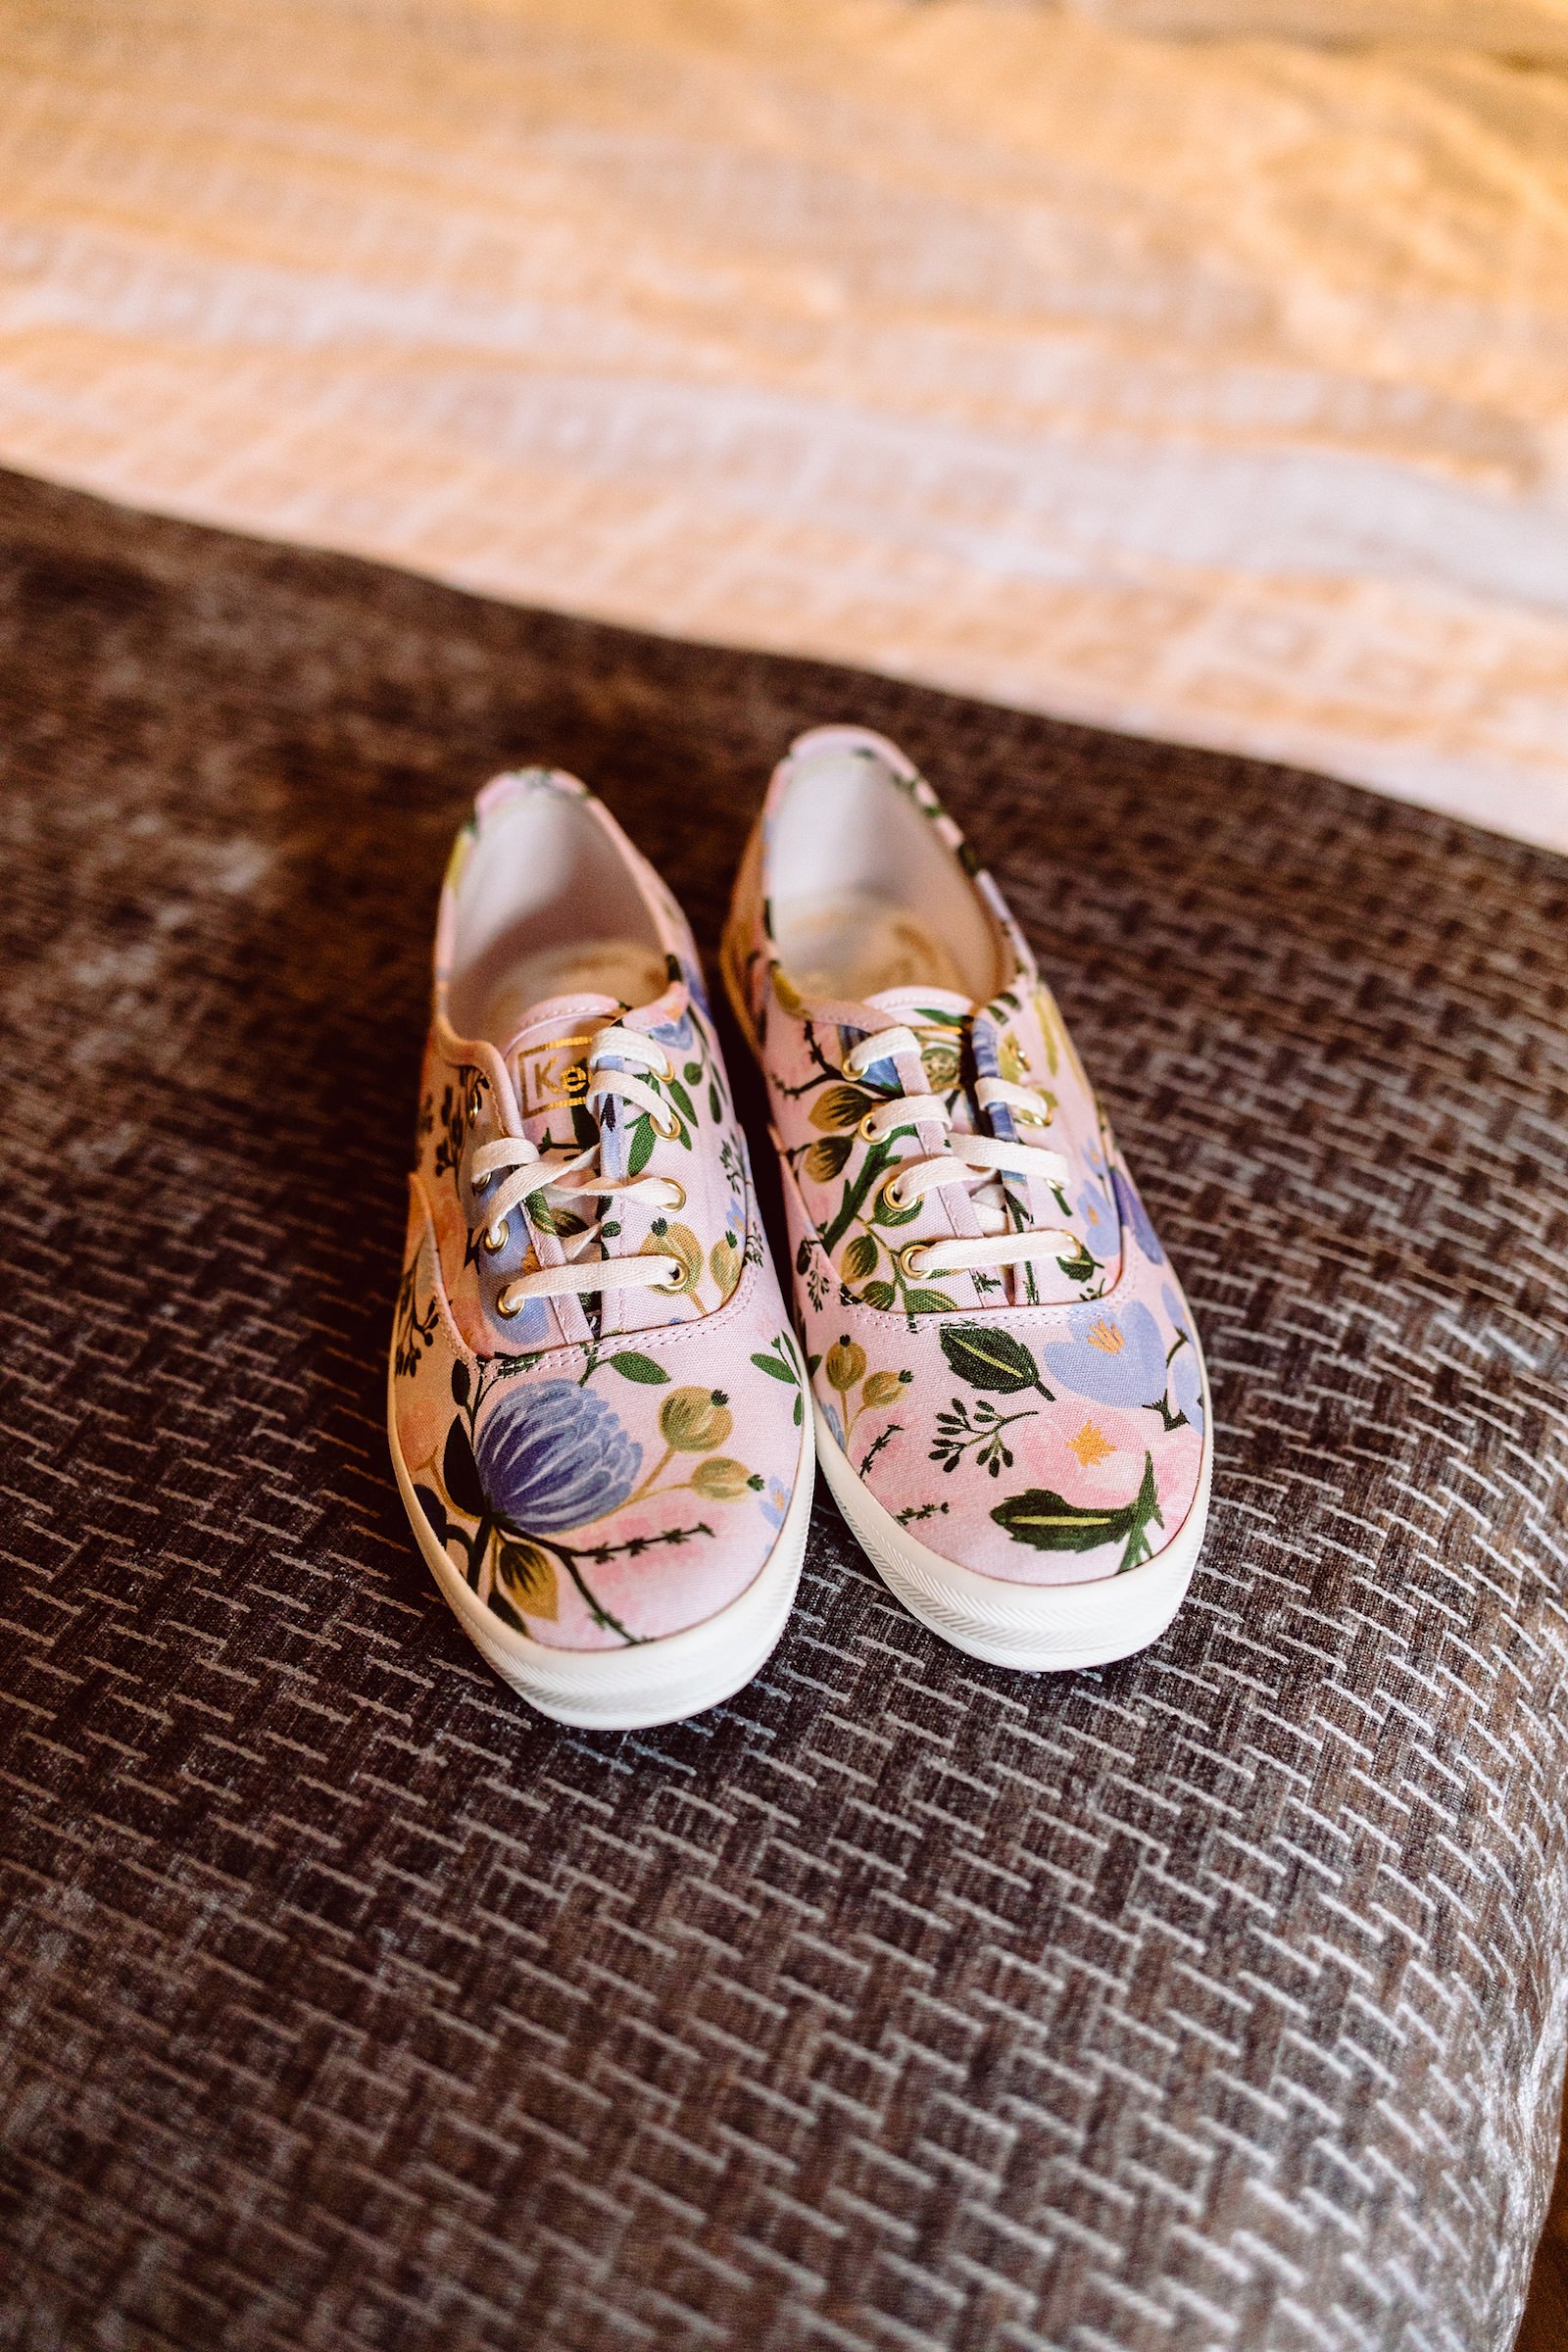 Floral Sneaker Wedding Shoes | Rifle Paper Co. Keds